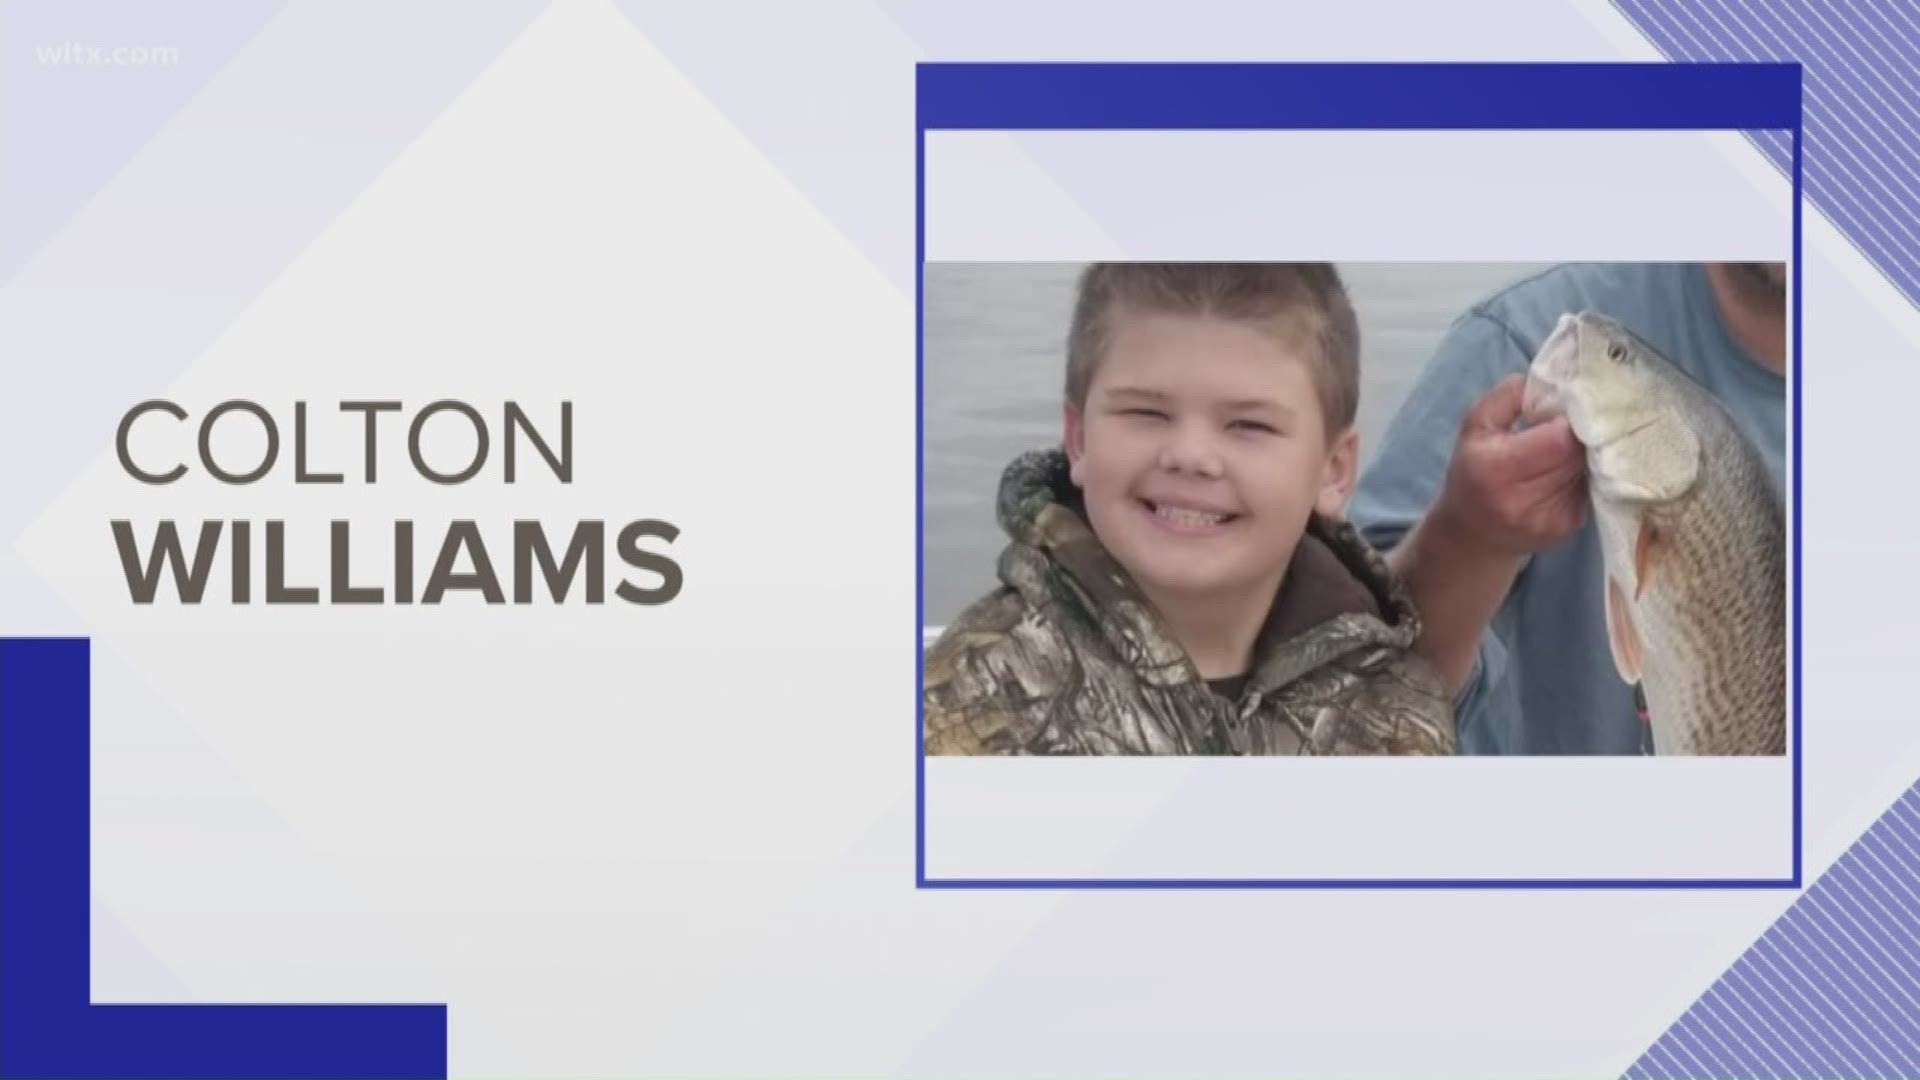 Colton Williams, 9, was killed while rabbit hunting with his family on Thanksgiving.